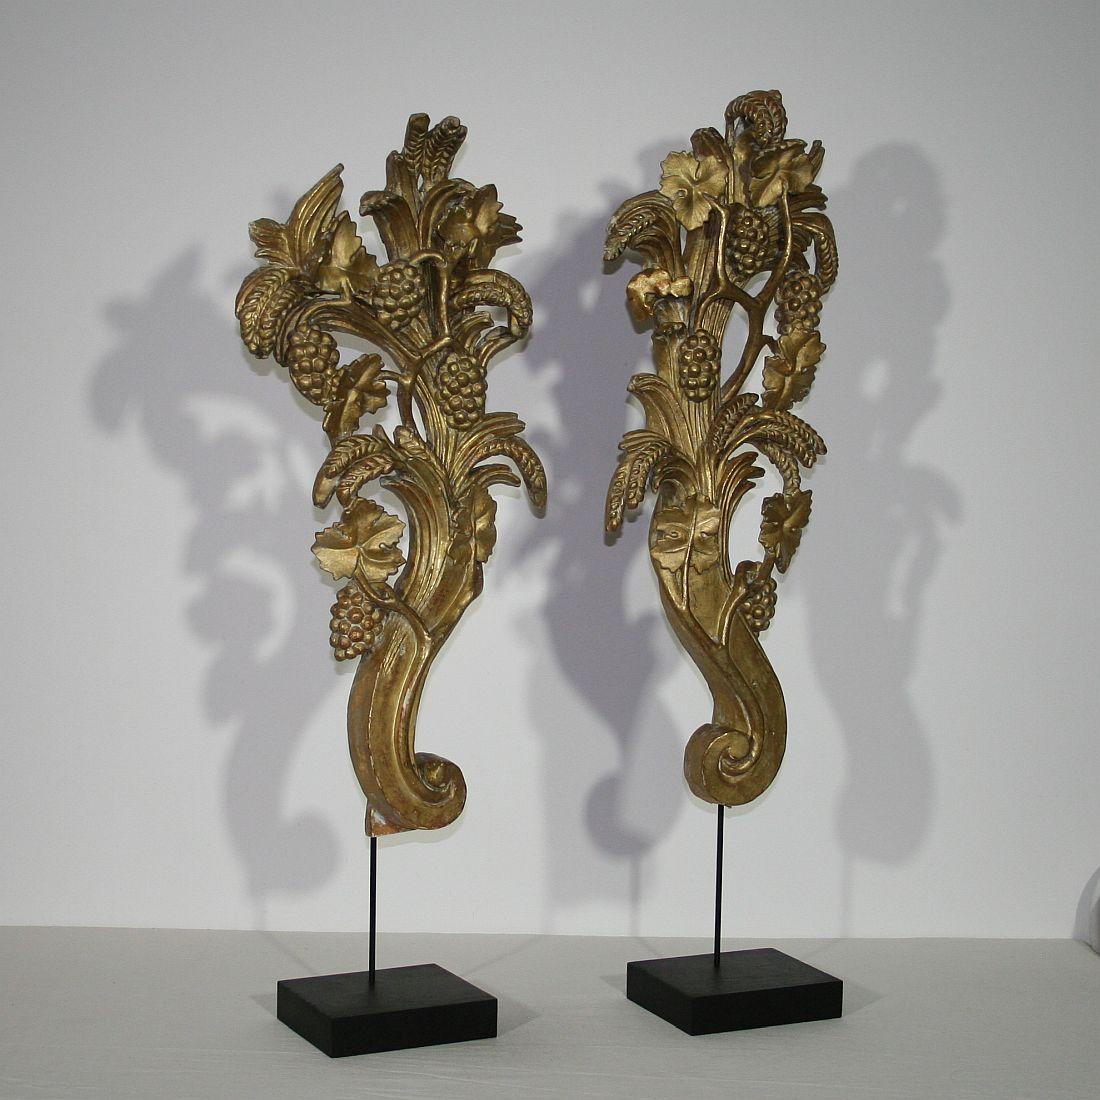 Hand-Carved Pair of Large 18th Century Italian Giltwood Baroque Ornaments